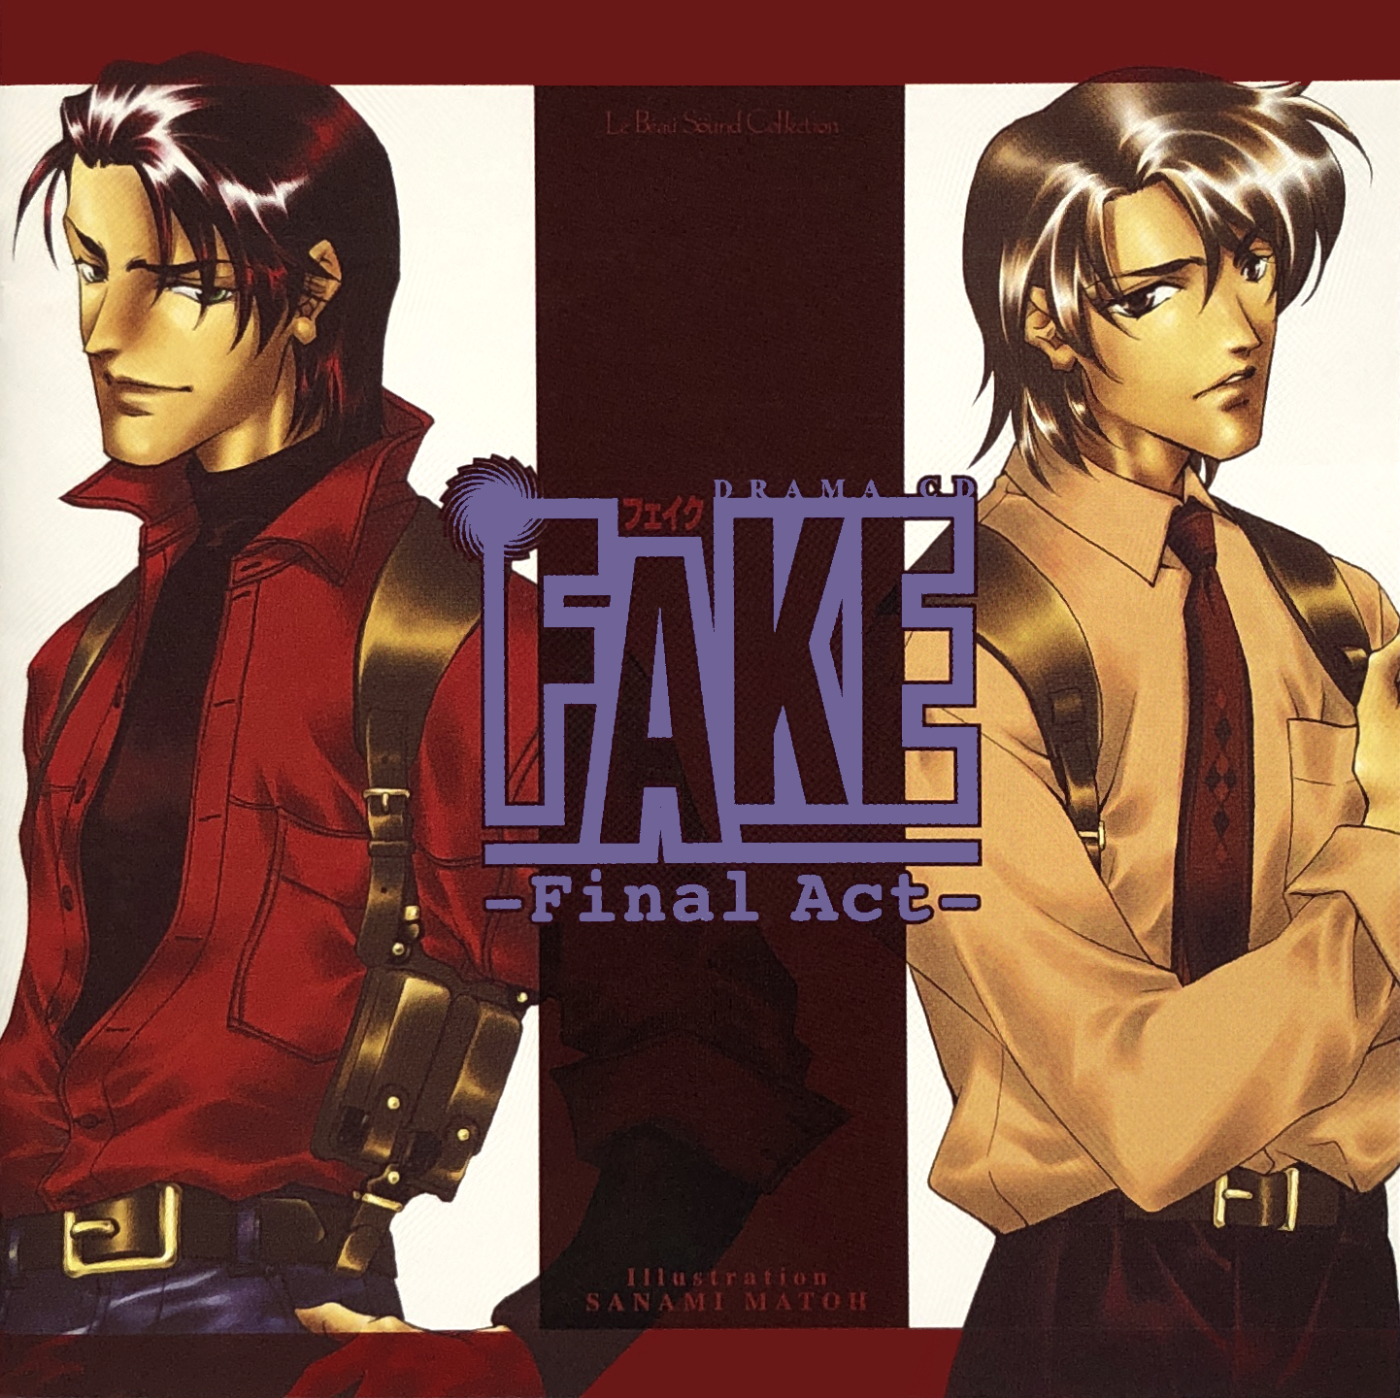 Release “FAKE: Final Act” by 真東砂波, read by 関智一, 飛田展男 